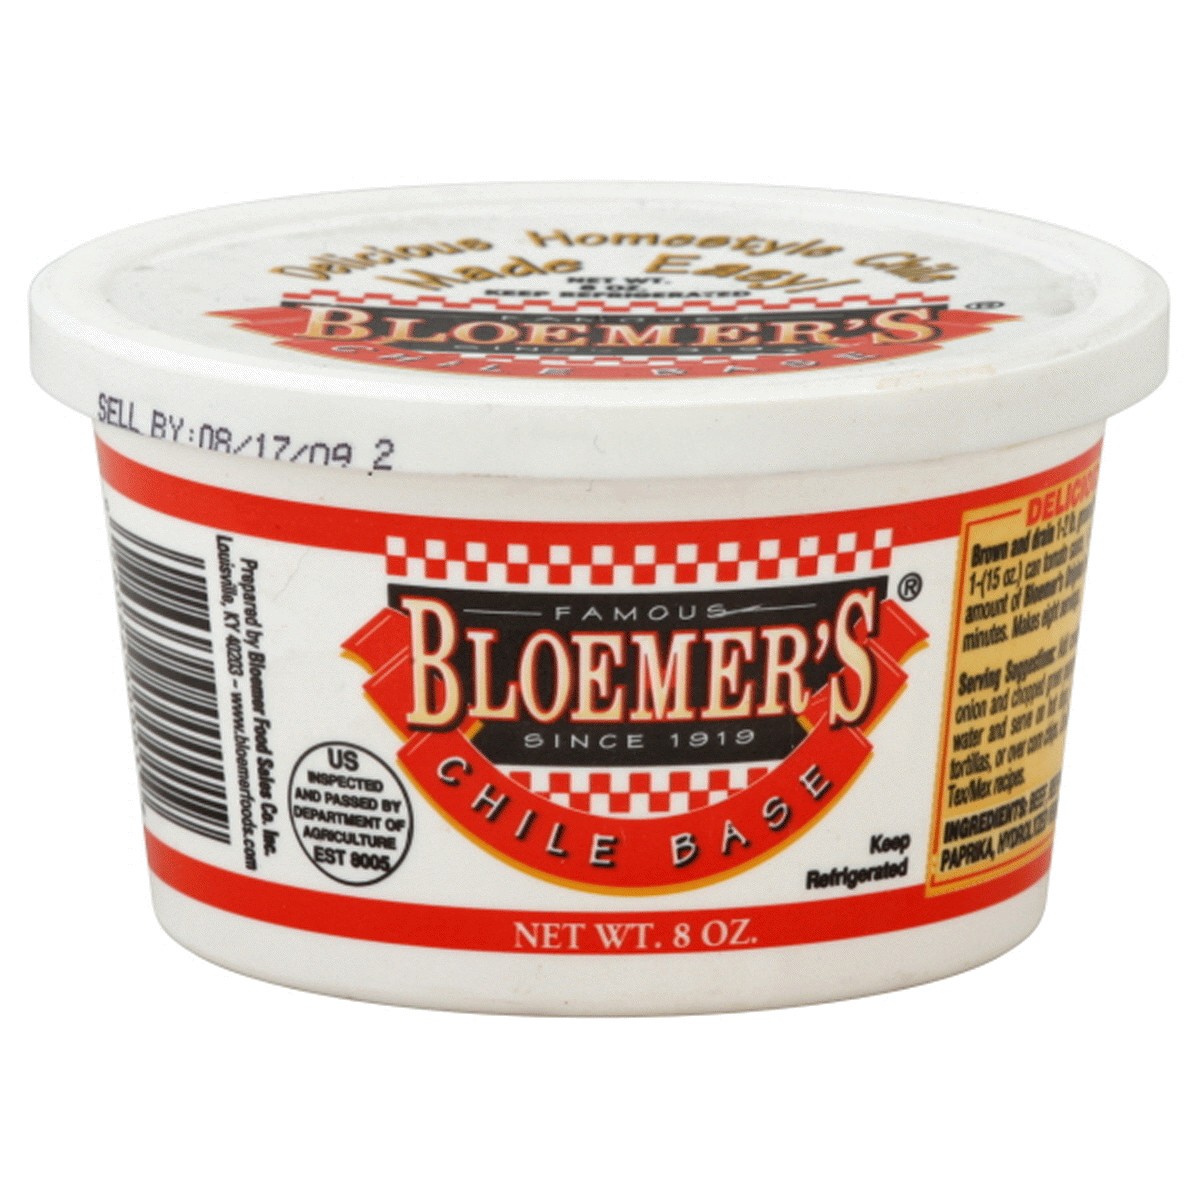 slide 1 of 1, BLOEMERS Famous Bloemer's Chile Base, 8 oz